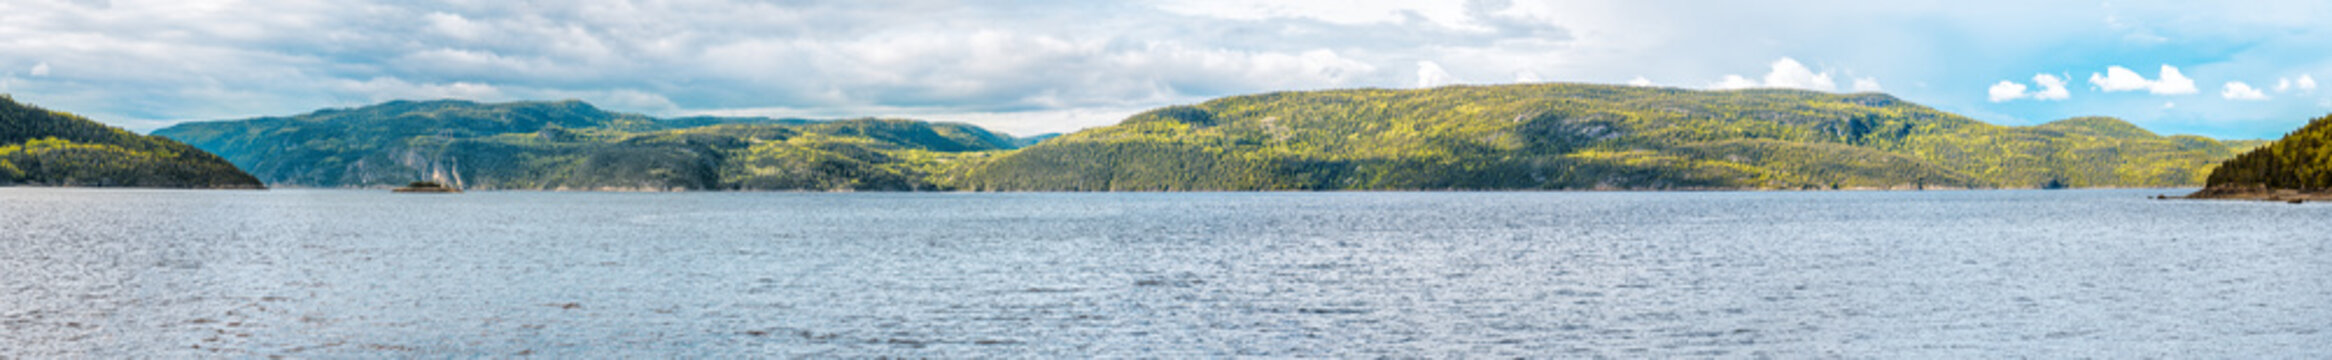 Panorama landscape view of peaceful Fjord Saguenay river in Quebec Canada with mountain cliffs and calm water